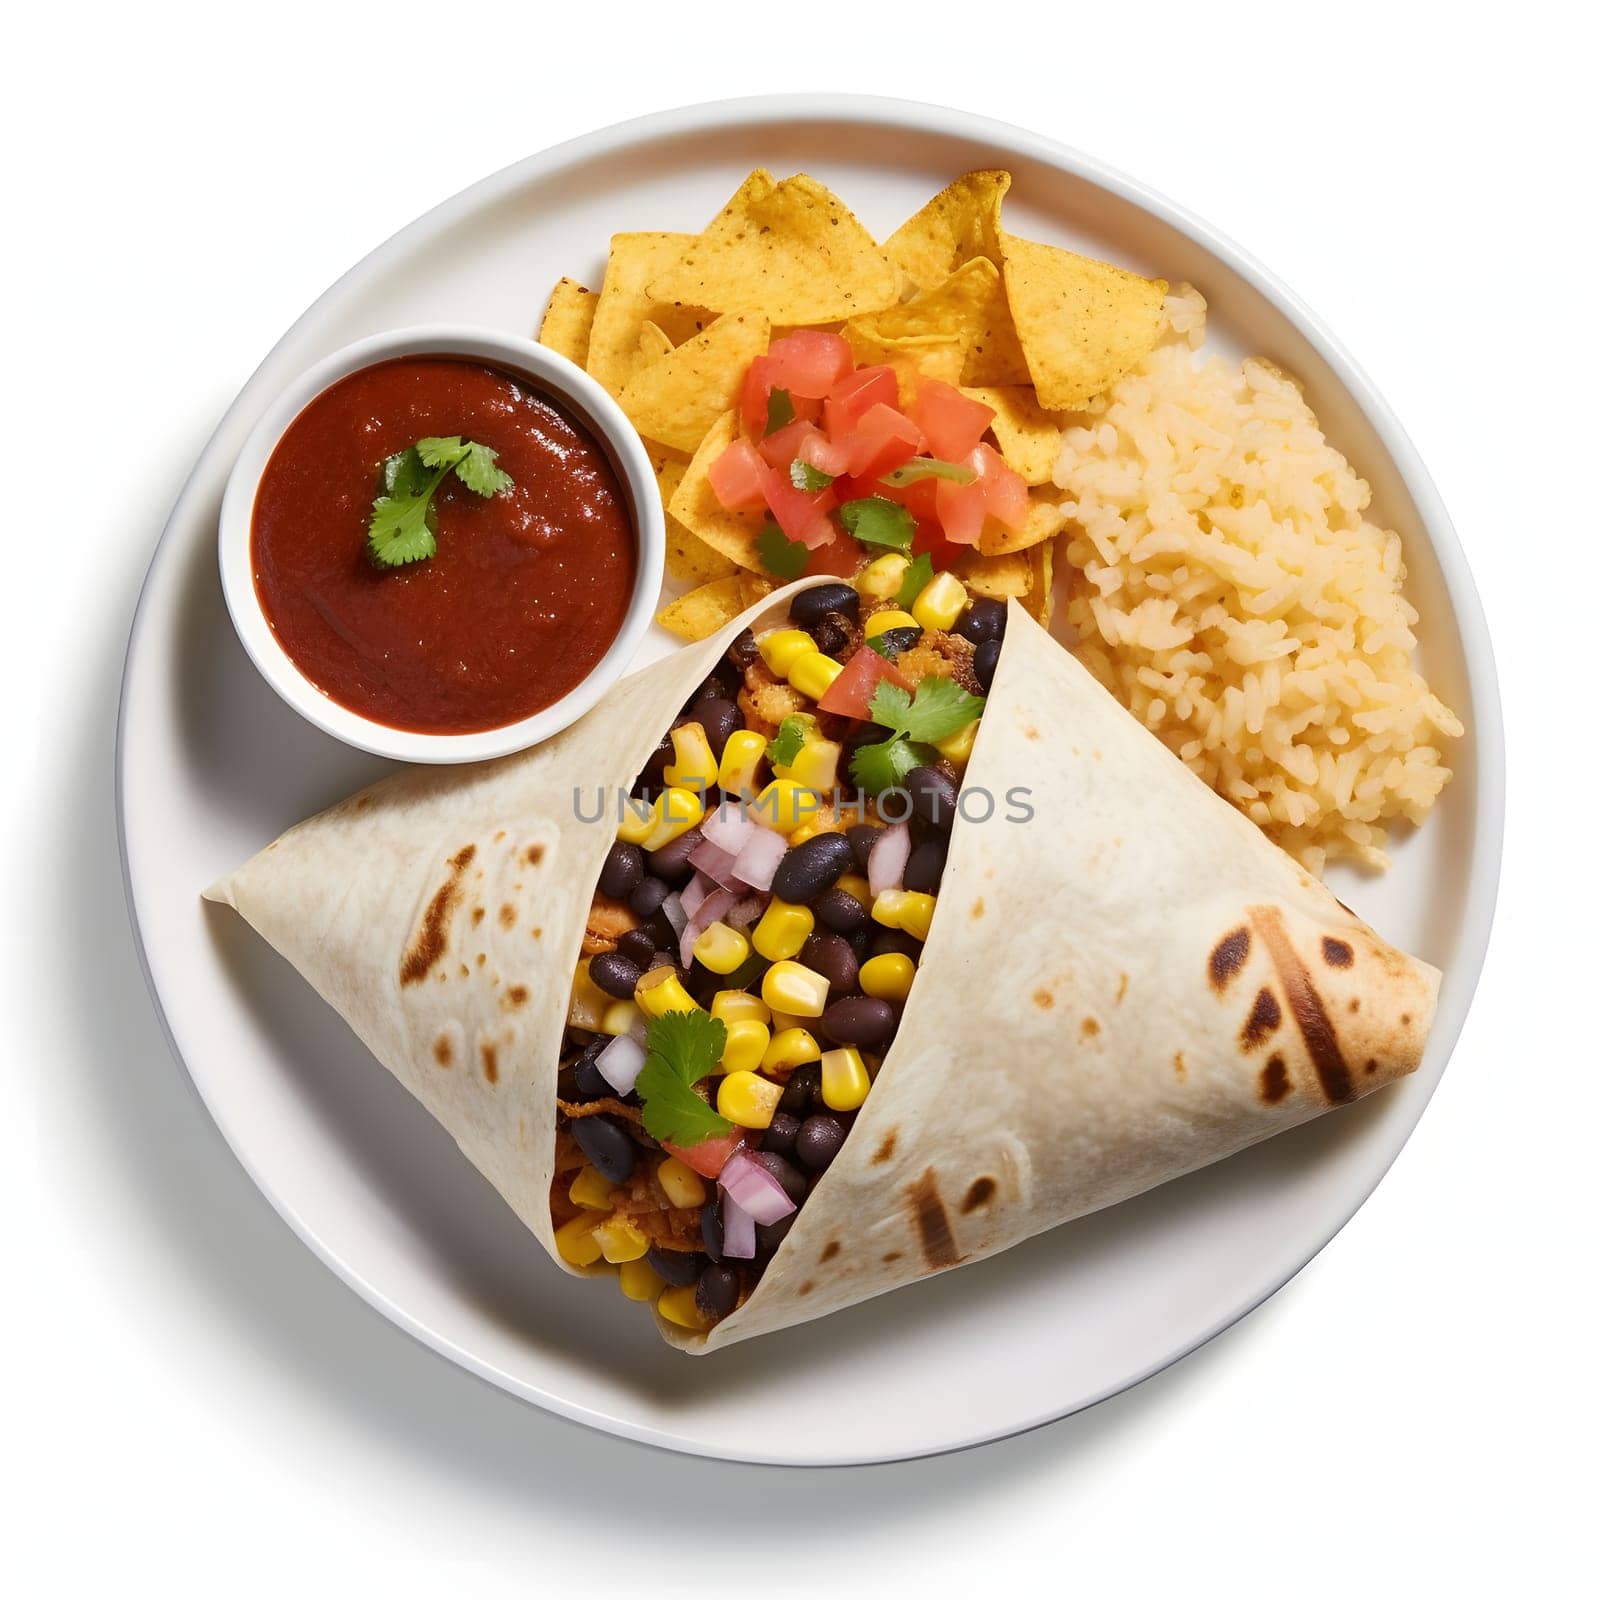 Top view of a plate, and on it grains of olives, corn, tortilla, flakes, rice ketchup. Corn as a dish of thanksgiving for the harvest, picture on a white isolated background. An atmosphere of joy and celebration.